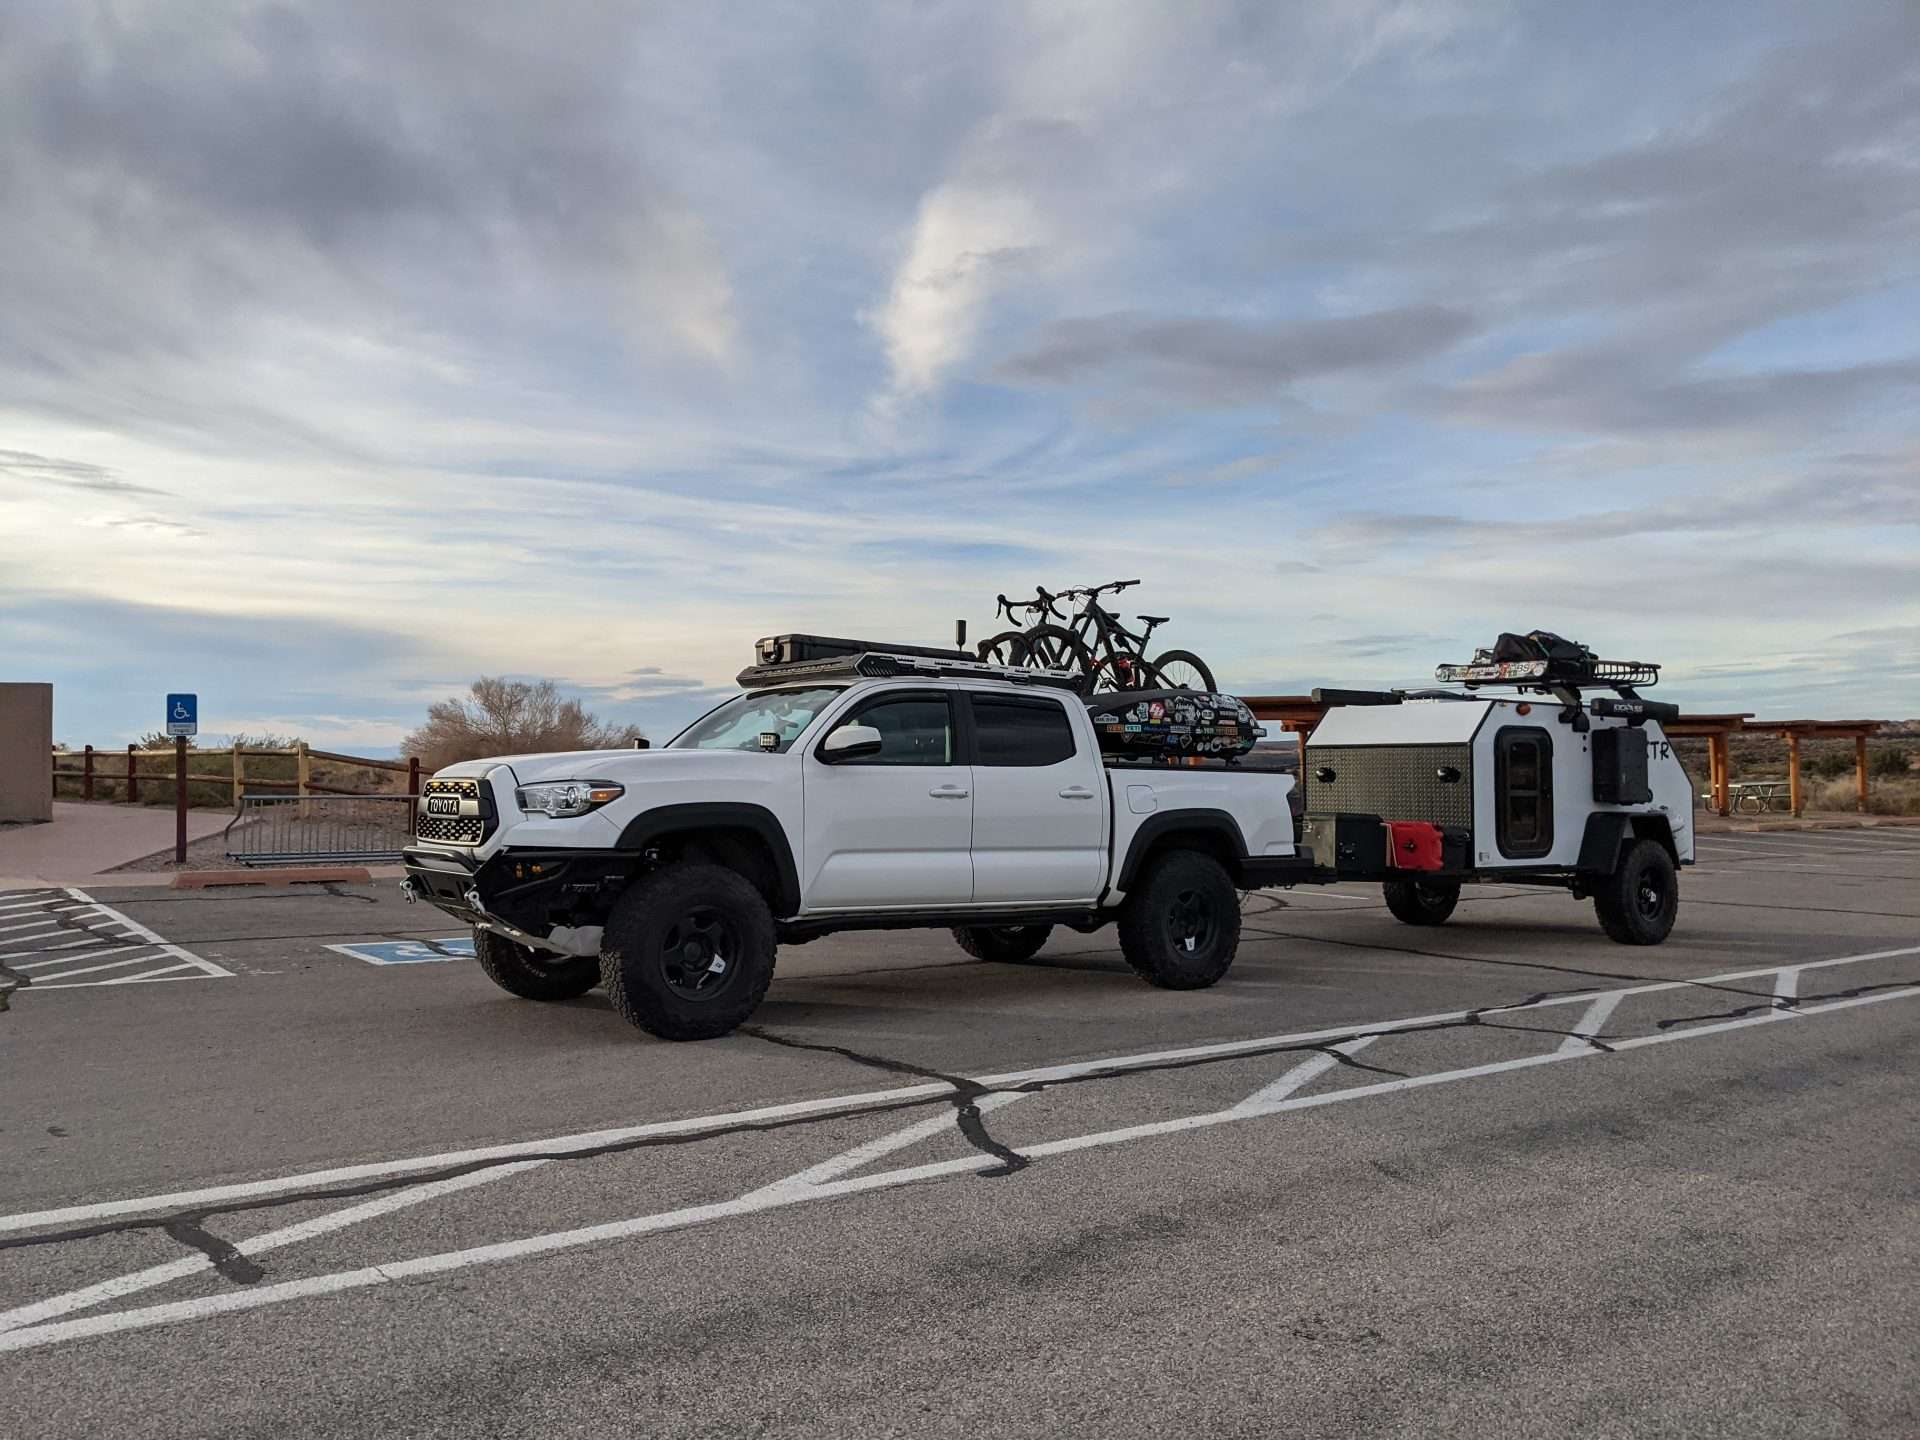 Toyota Tacoma towing overlanding trailer